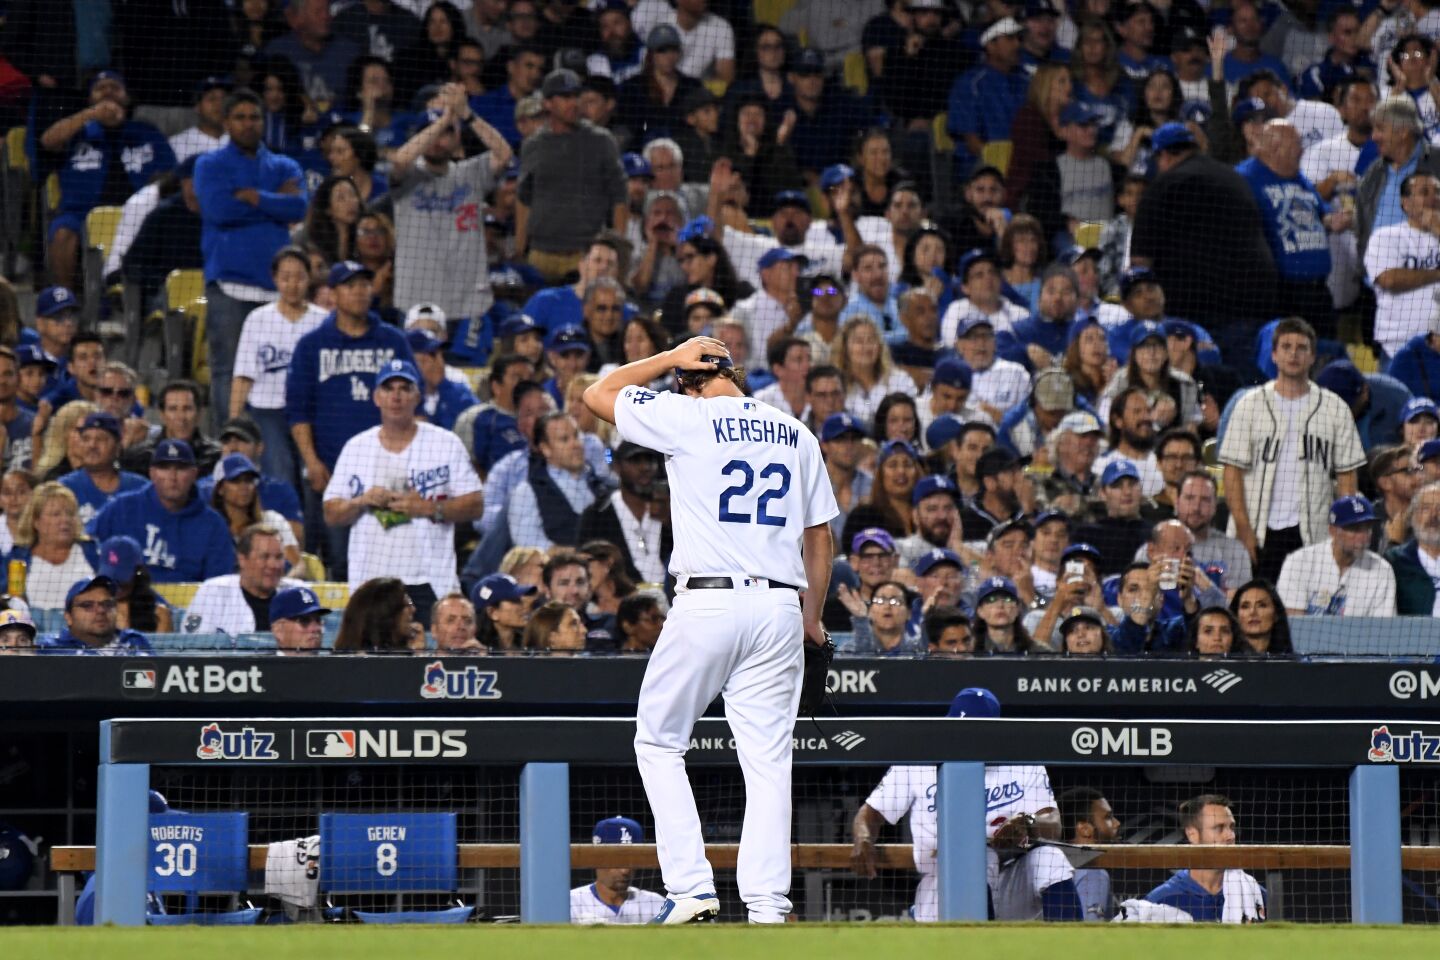 Clayton Kershaw walks back to the dugout after giving up back-to-back home runs in the eighth inning against the Nationals.